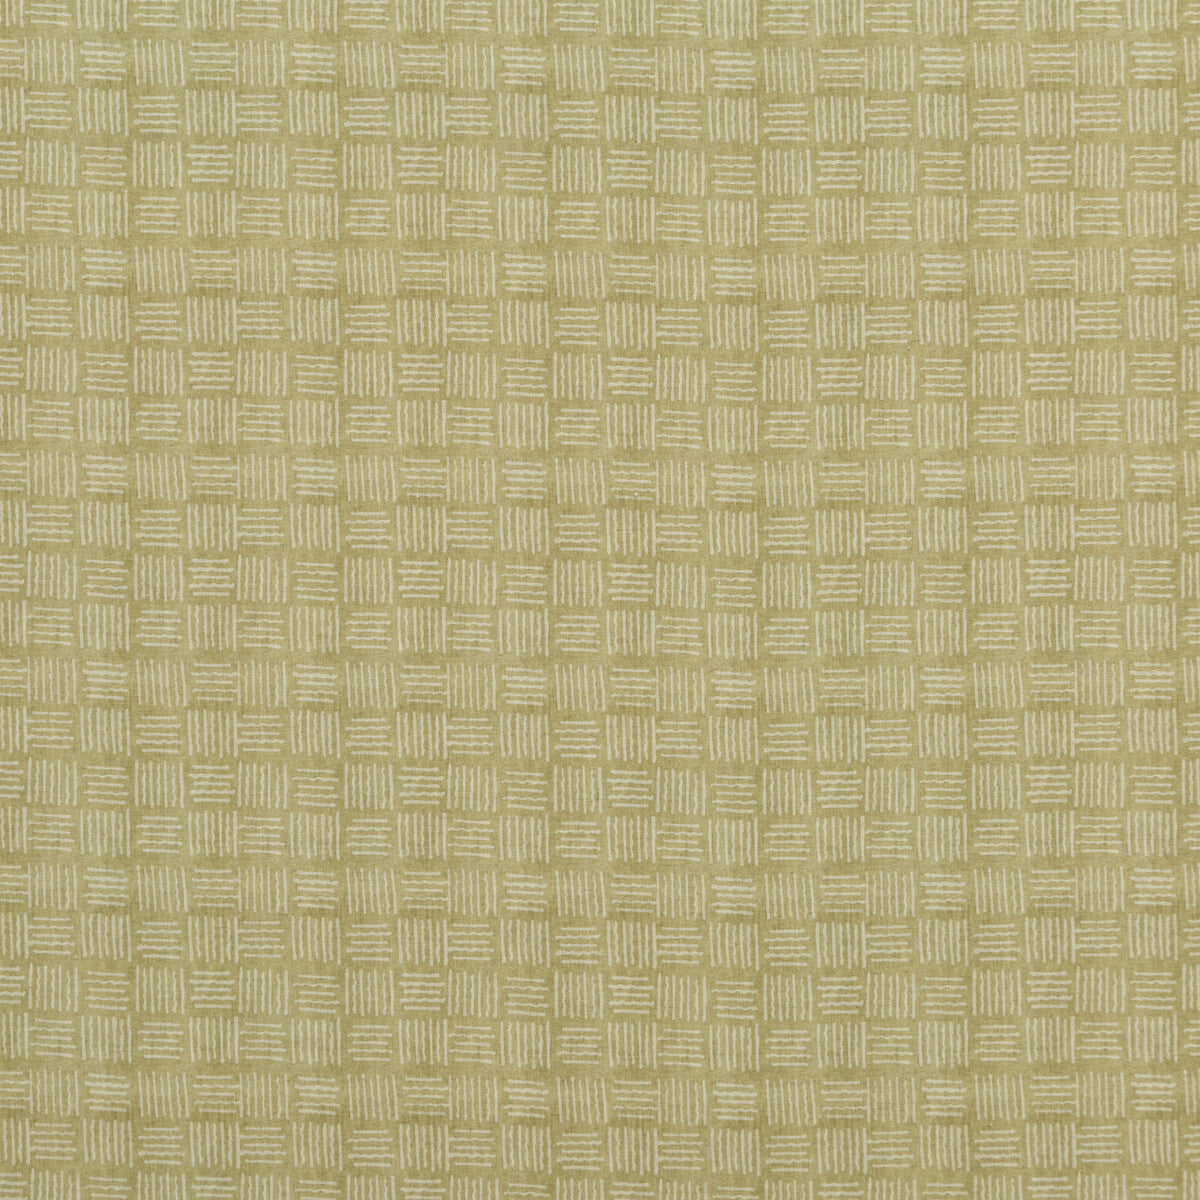 Salsa Square fabric in cashew color - pattern PP50441.4.0 - by Baker Lifestyle in the Carnival collection